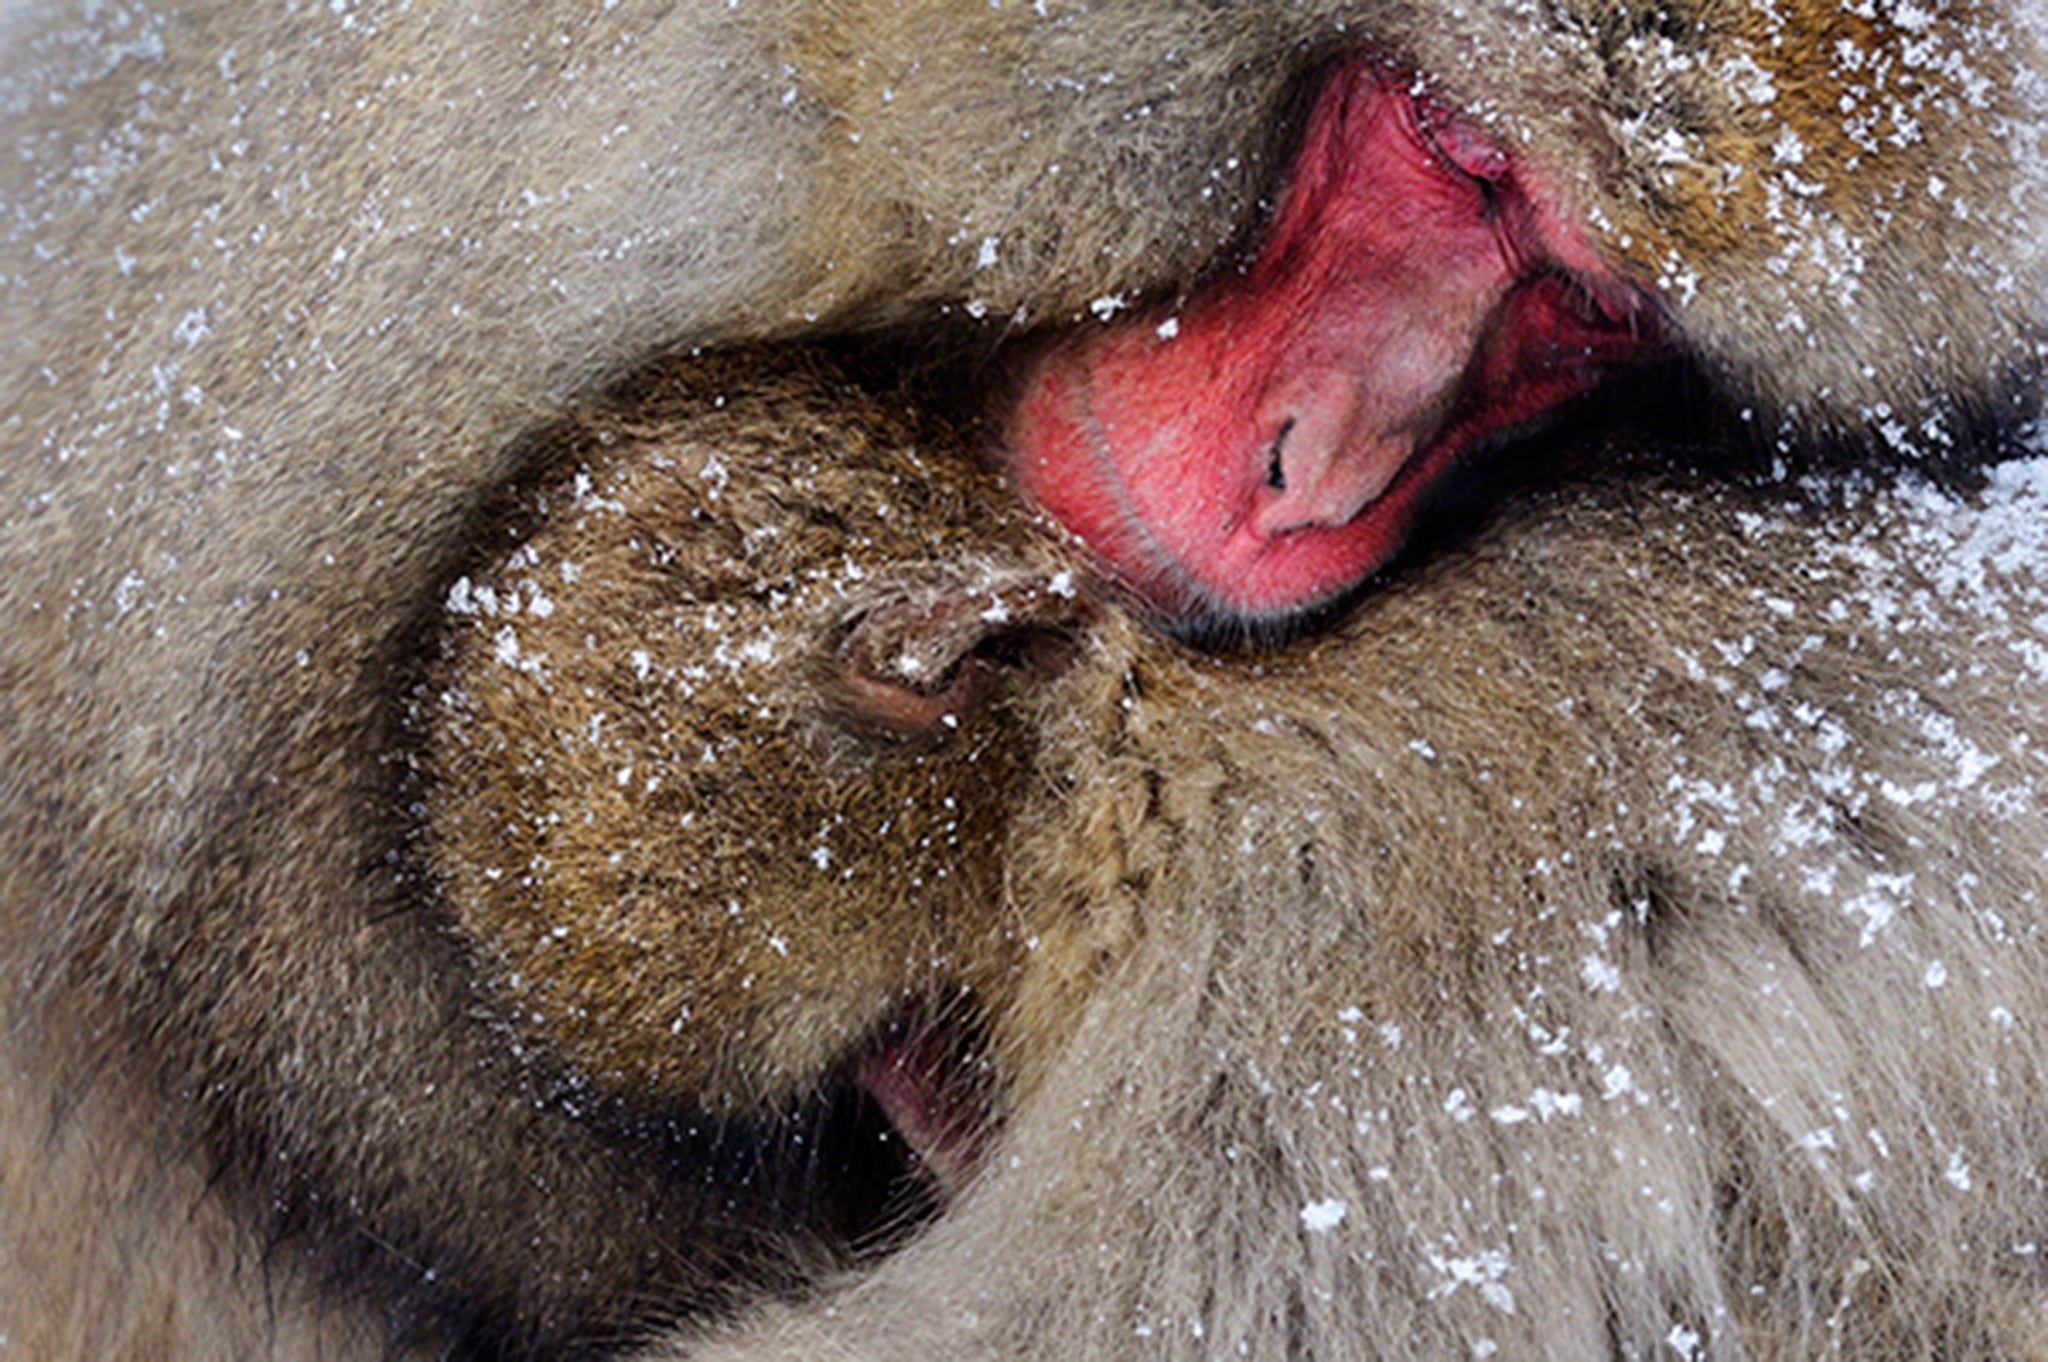 Japanese macaque huddle together